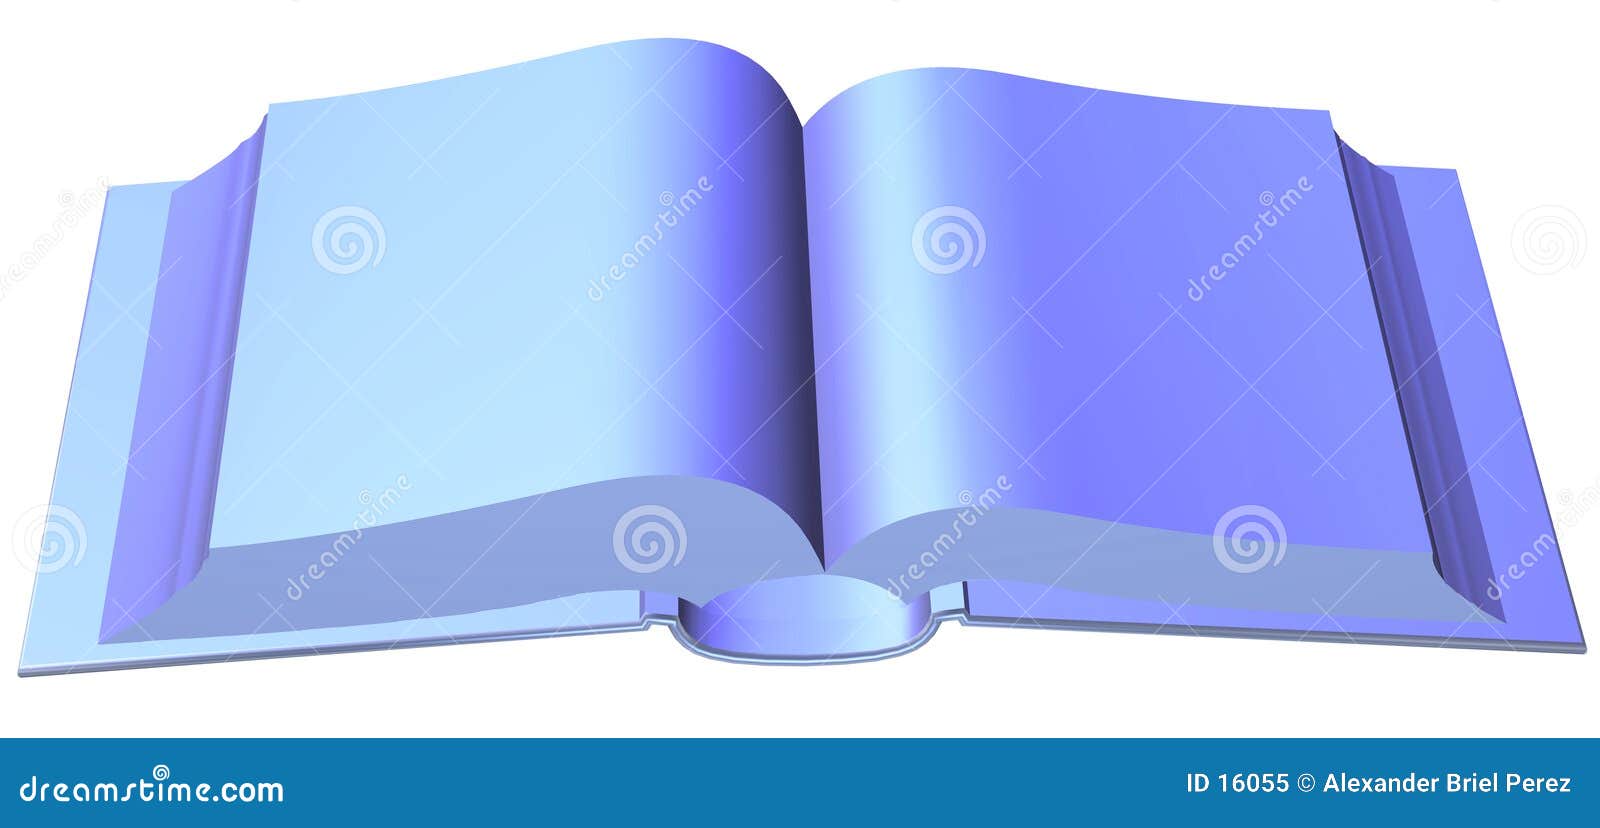 a-book-template-stock-illustration-illustration-of-abstract-16055